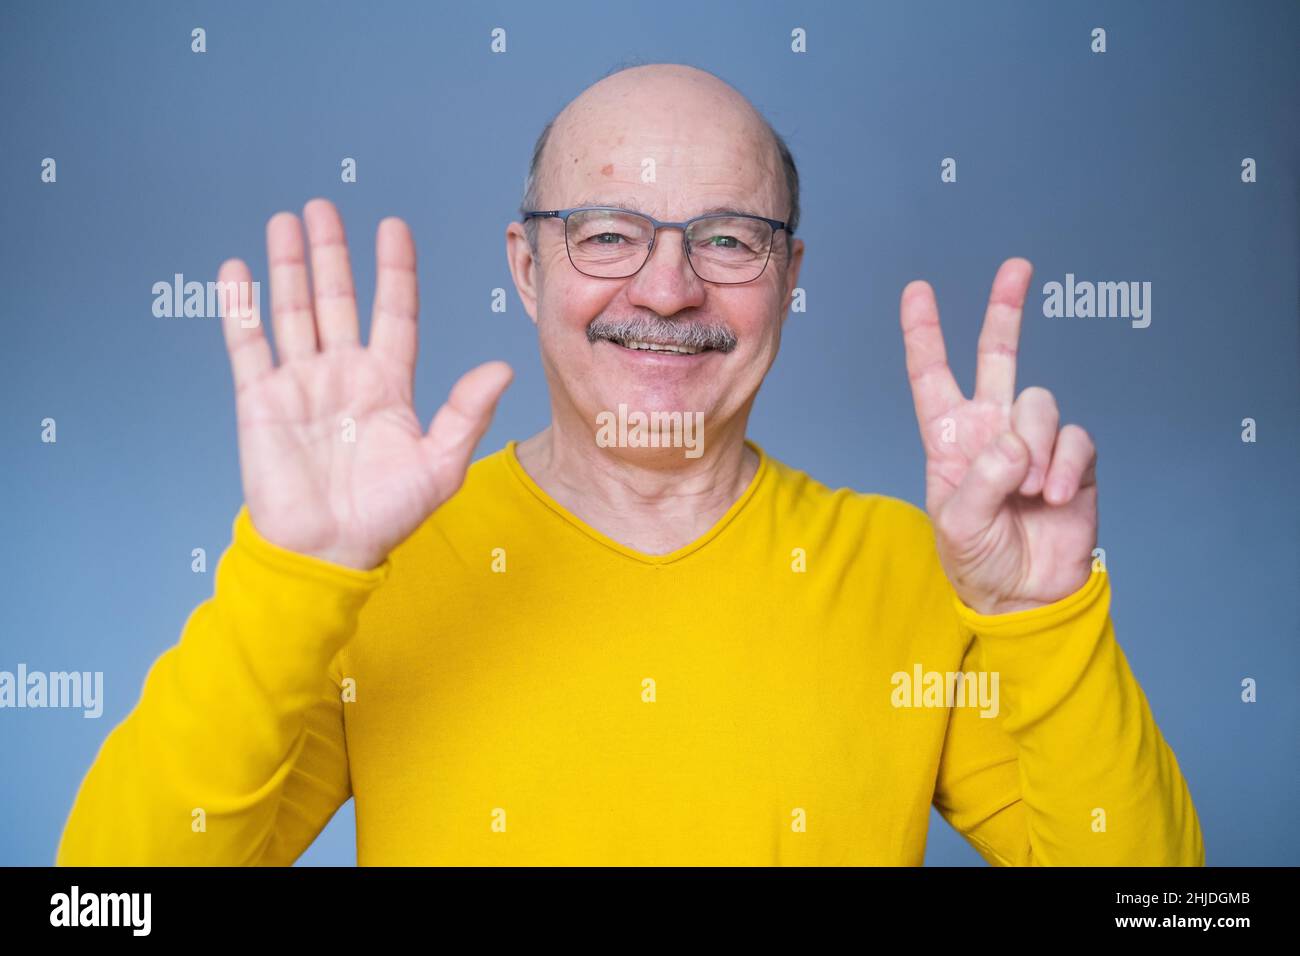 Senior man raising hand, showing number seven with fingers, counting something, standing over blue background Stock Photo